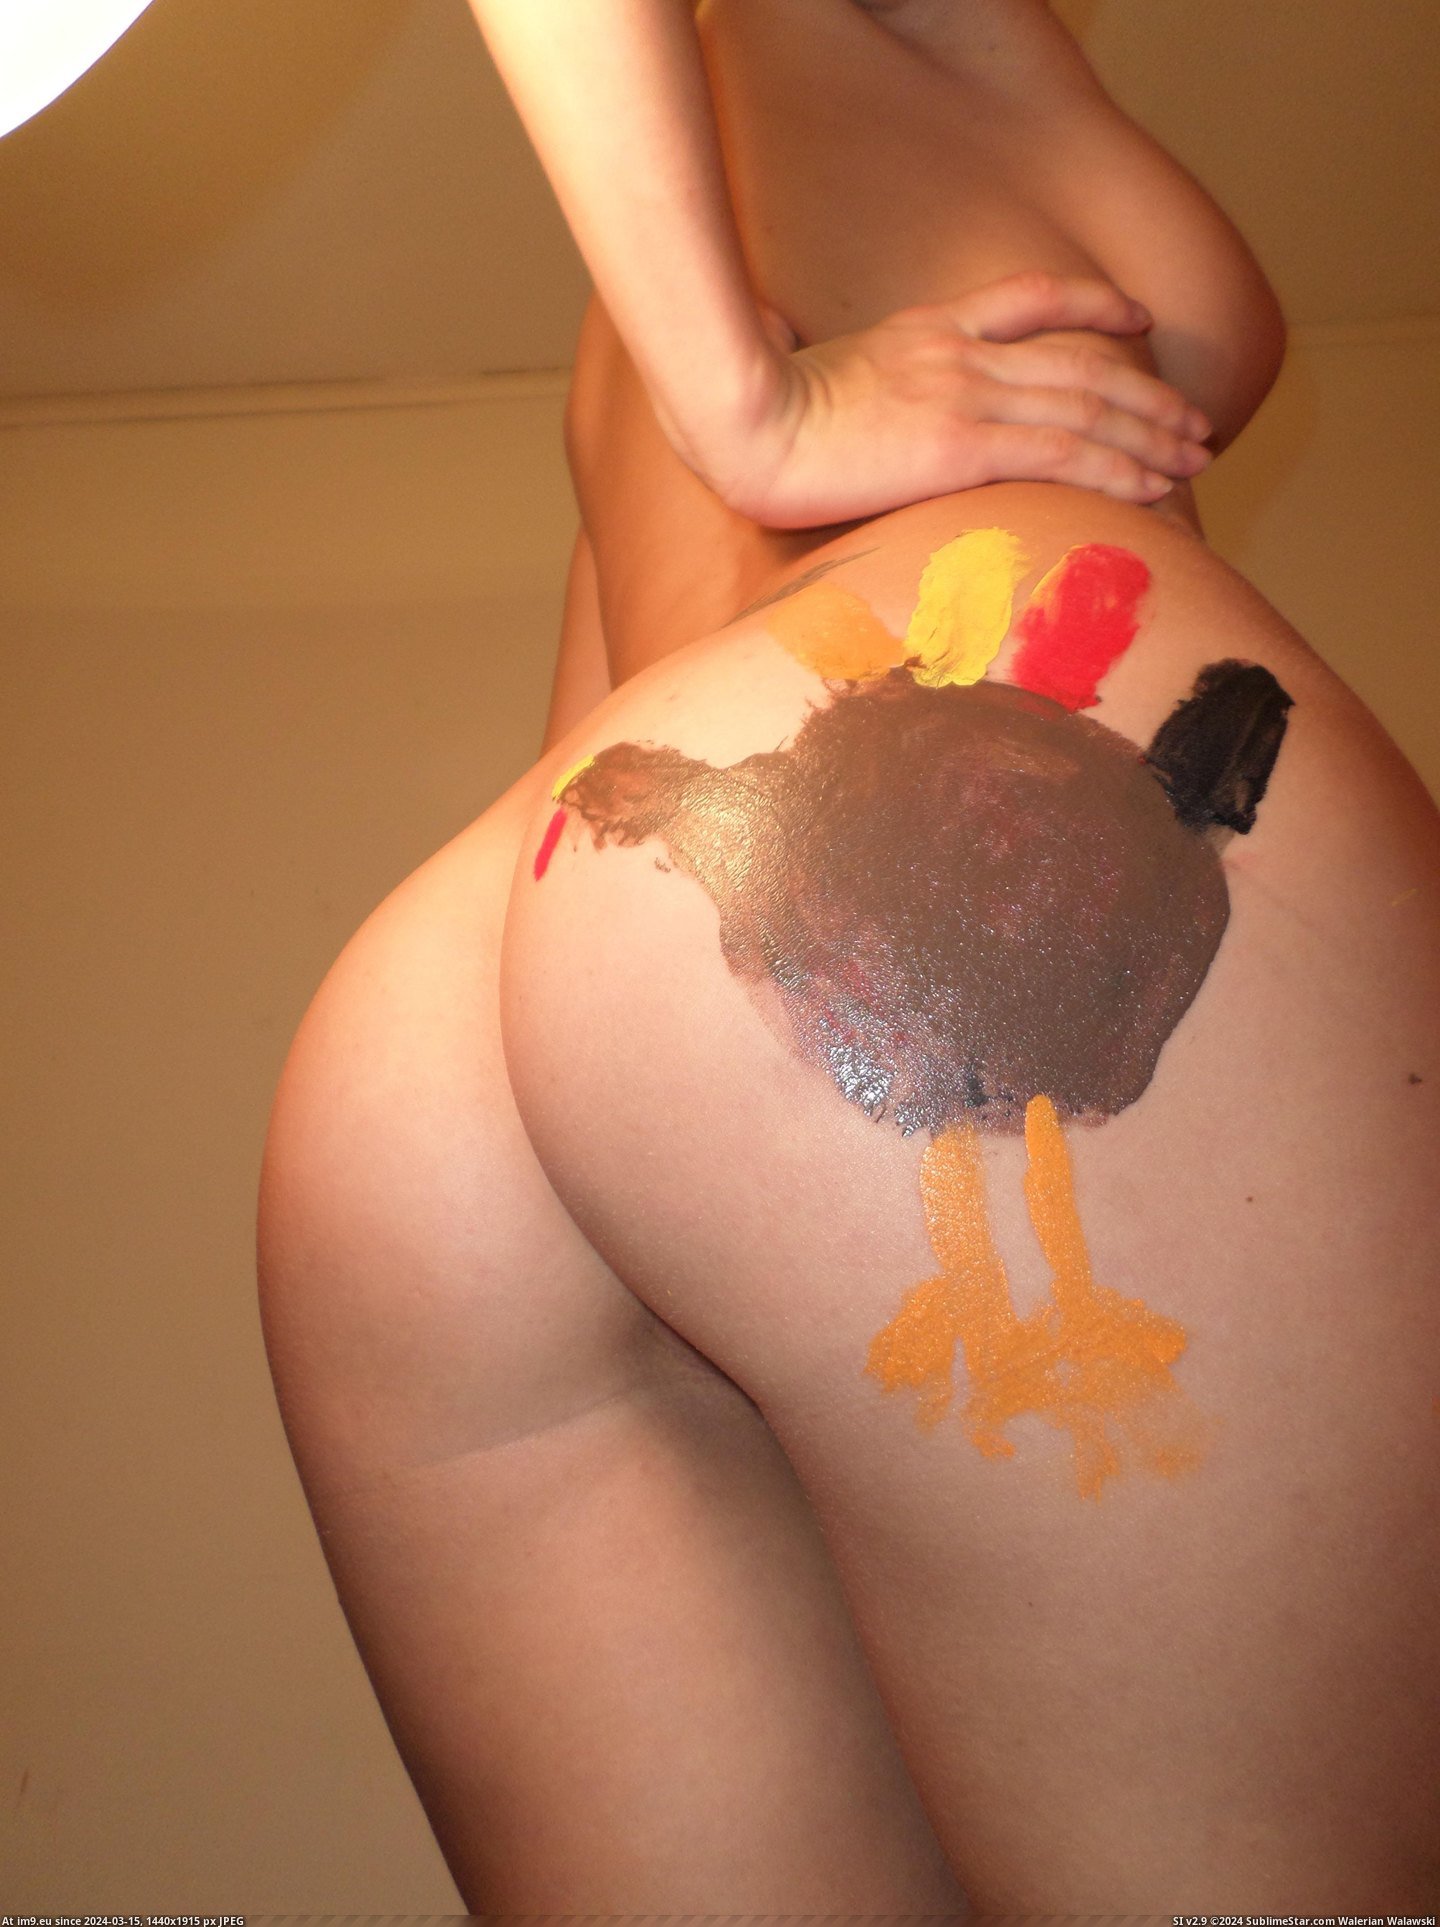 #Banner #Wore #Amily #Thanksgiving [Gonewild] I wore these to Thanksgiving with my [F]amily! Want me to post the after pictures? Banner 9 Pic. (Изображение из альбом My r/GONEWILD favs))